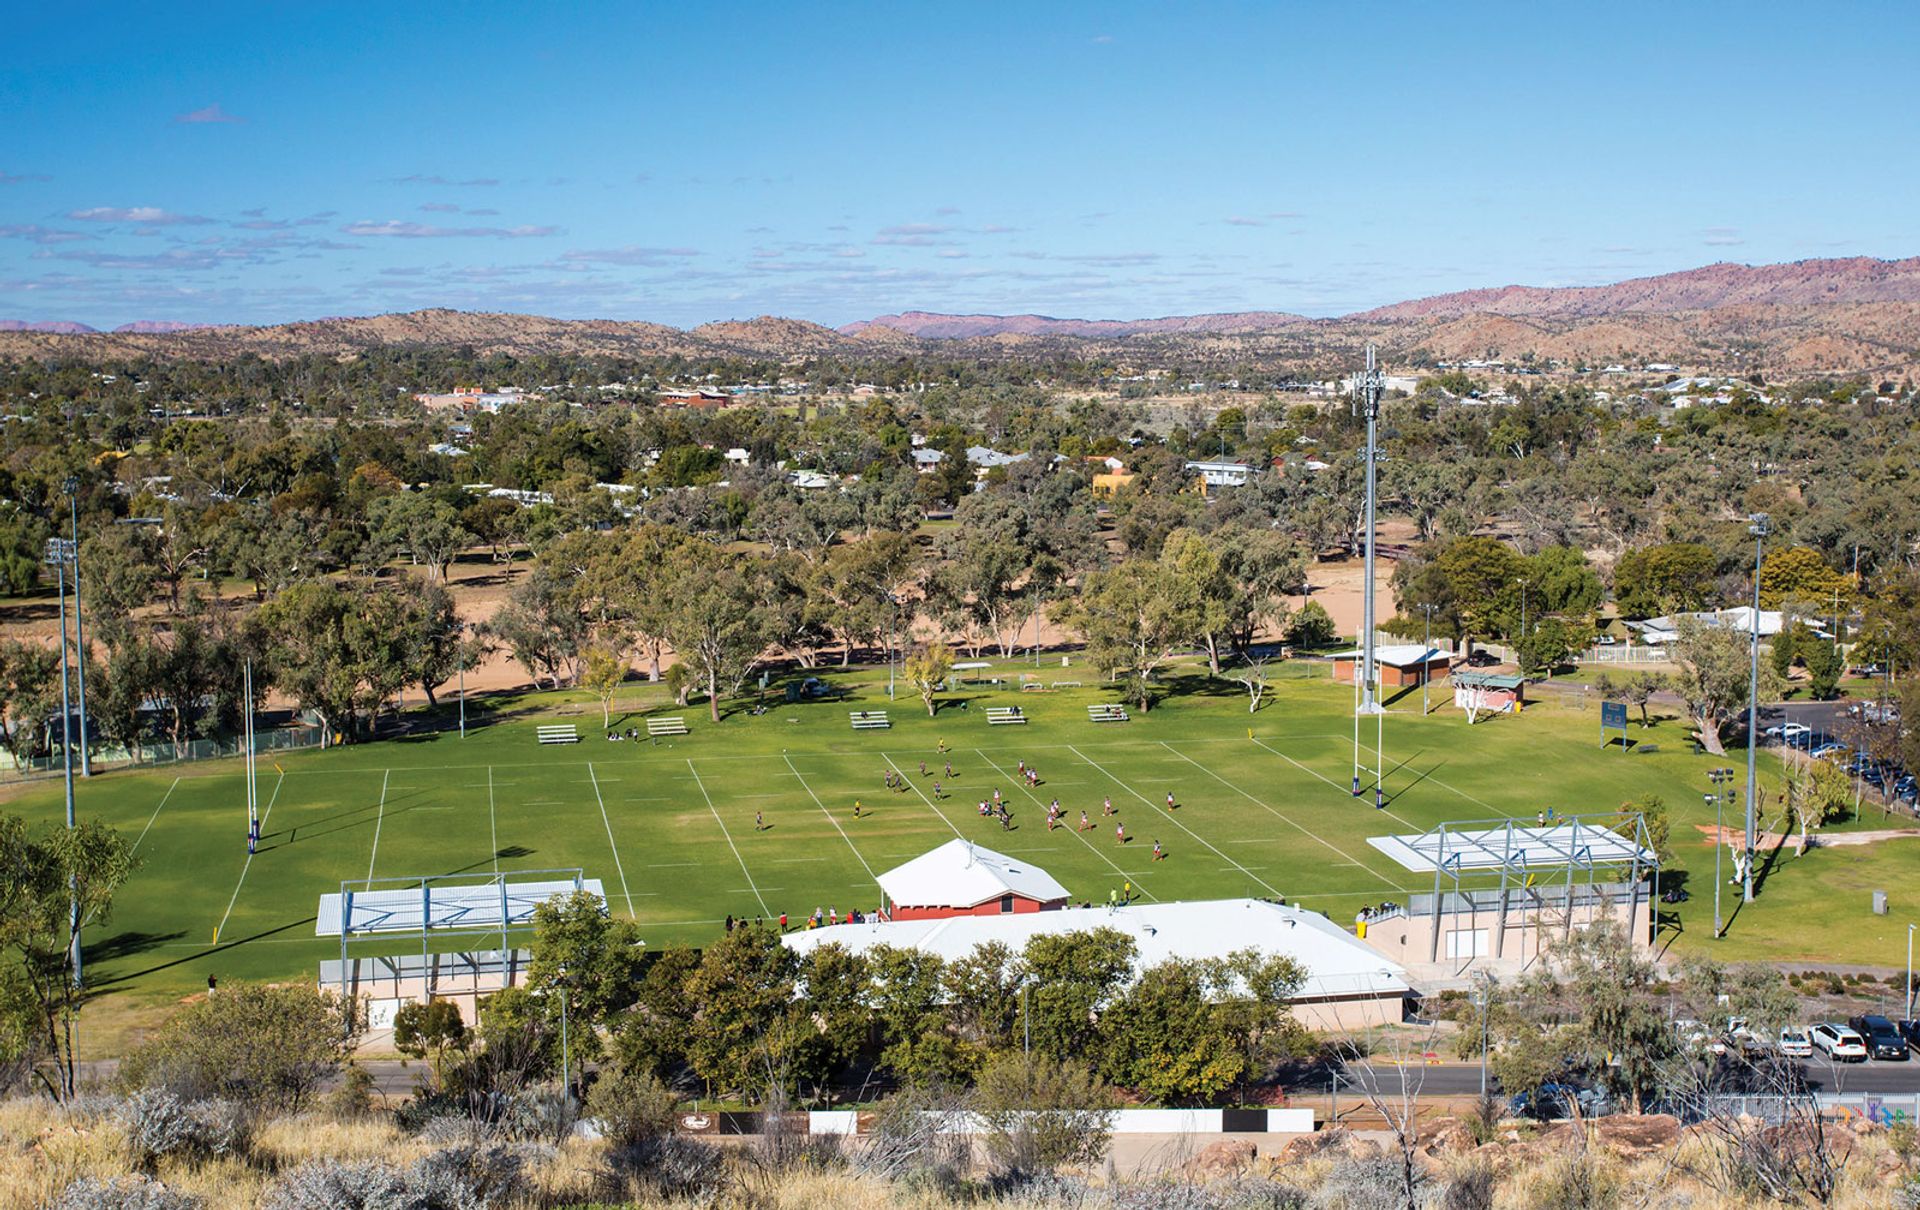 Australia’s Northern Territory is acquiring Alice Springs’s football oval to make way for the National Aboriginal Art Gallery Chris Putnam/Alamy